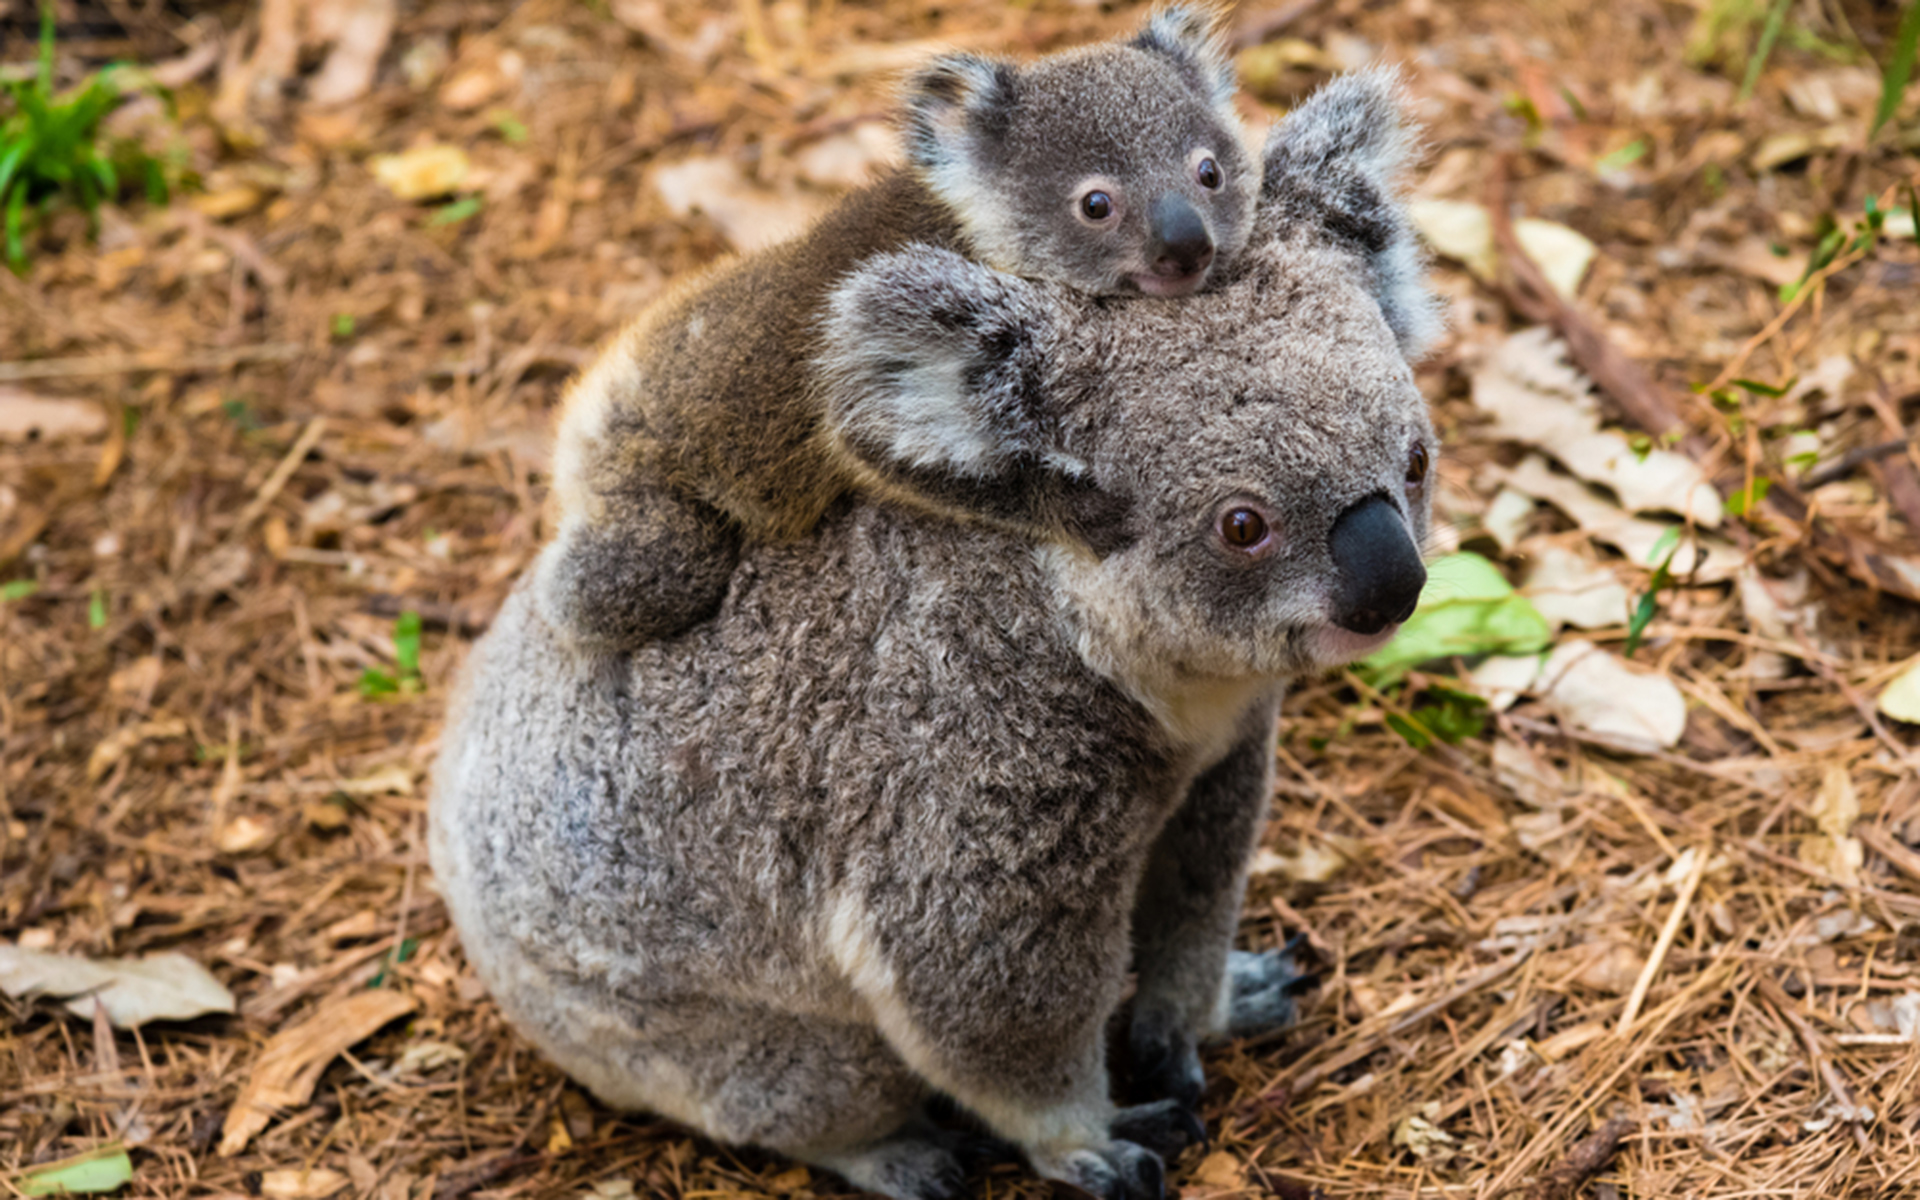 A Koala with a baby on its back moves along the ground